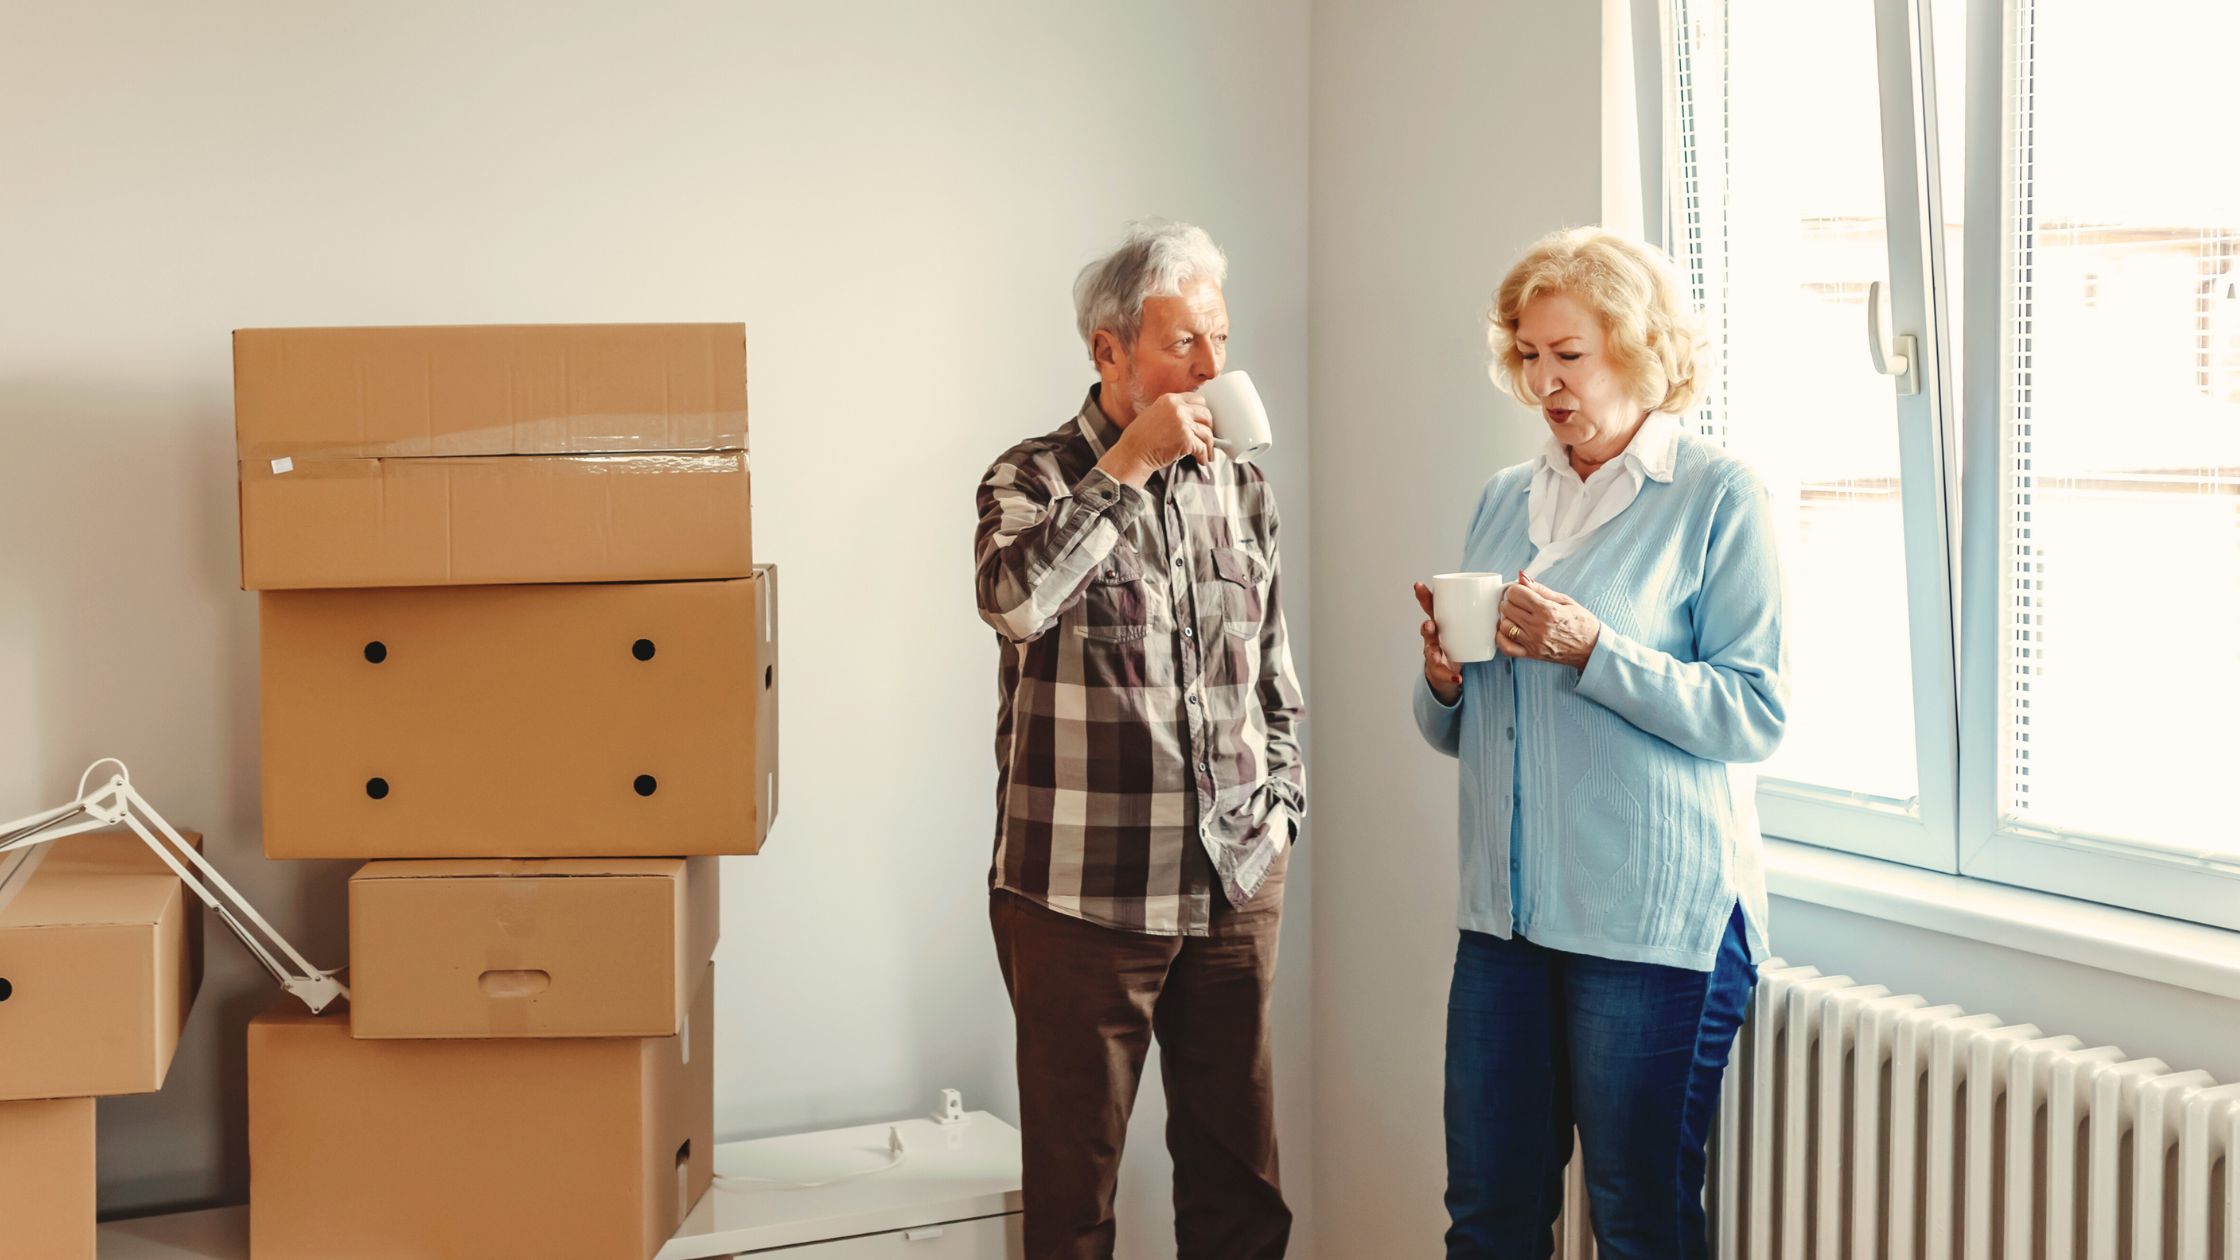 A retired couple enjoy a cup of coffee on moving day while preparing to downsize.